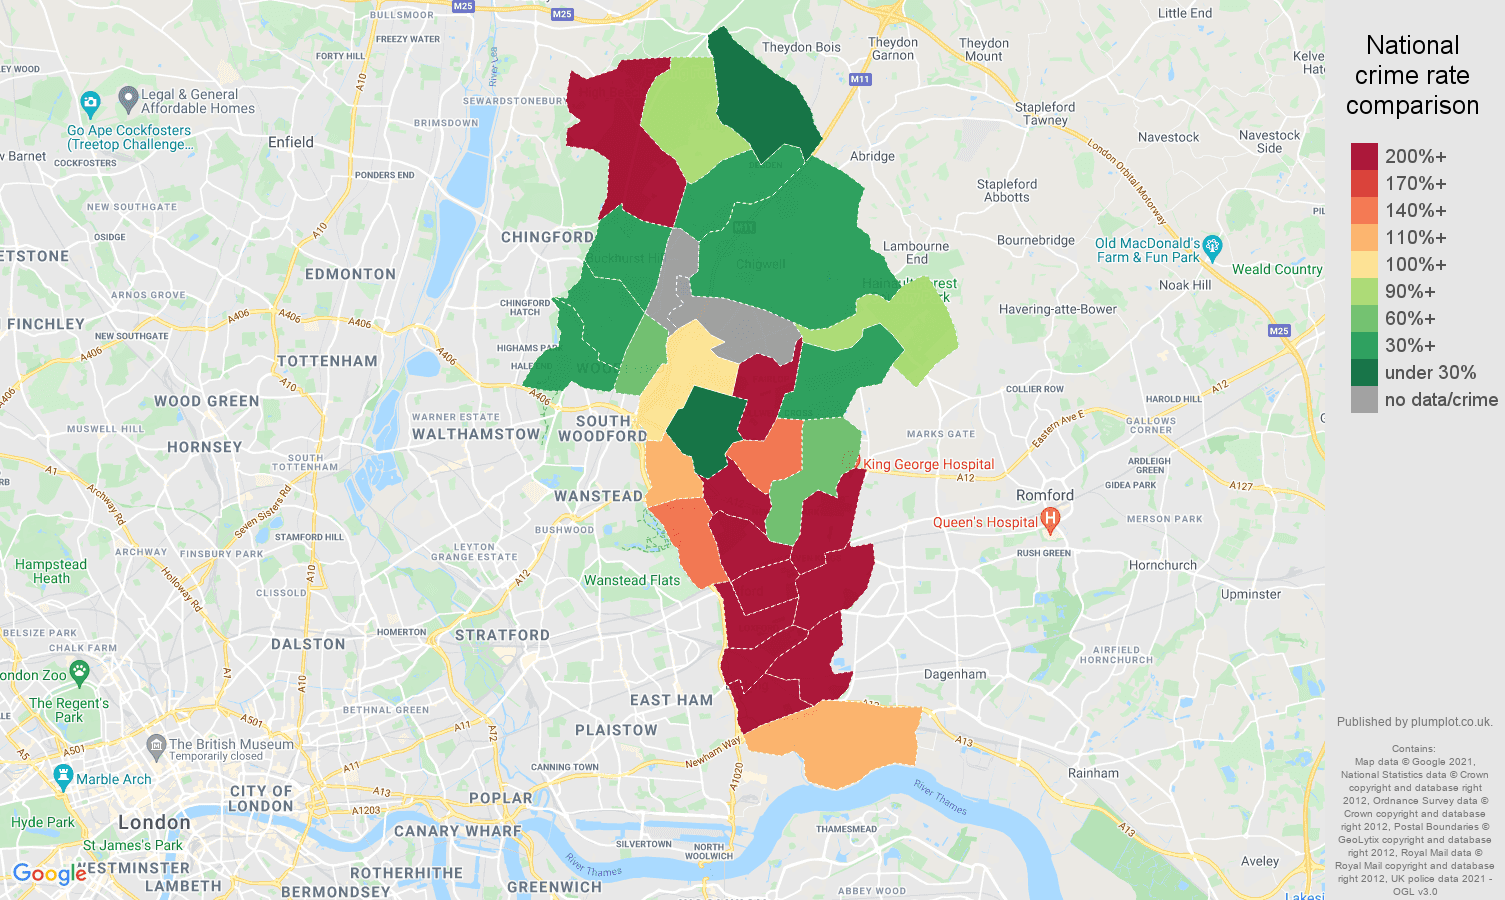 Ilford theft from the person crime rate comparison map